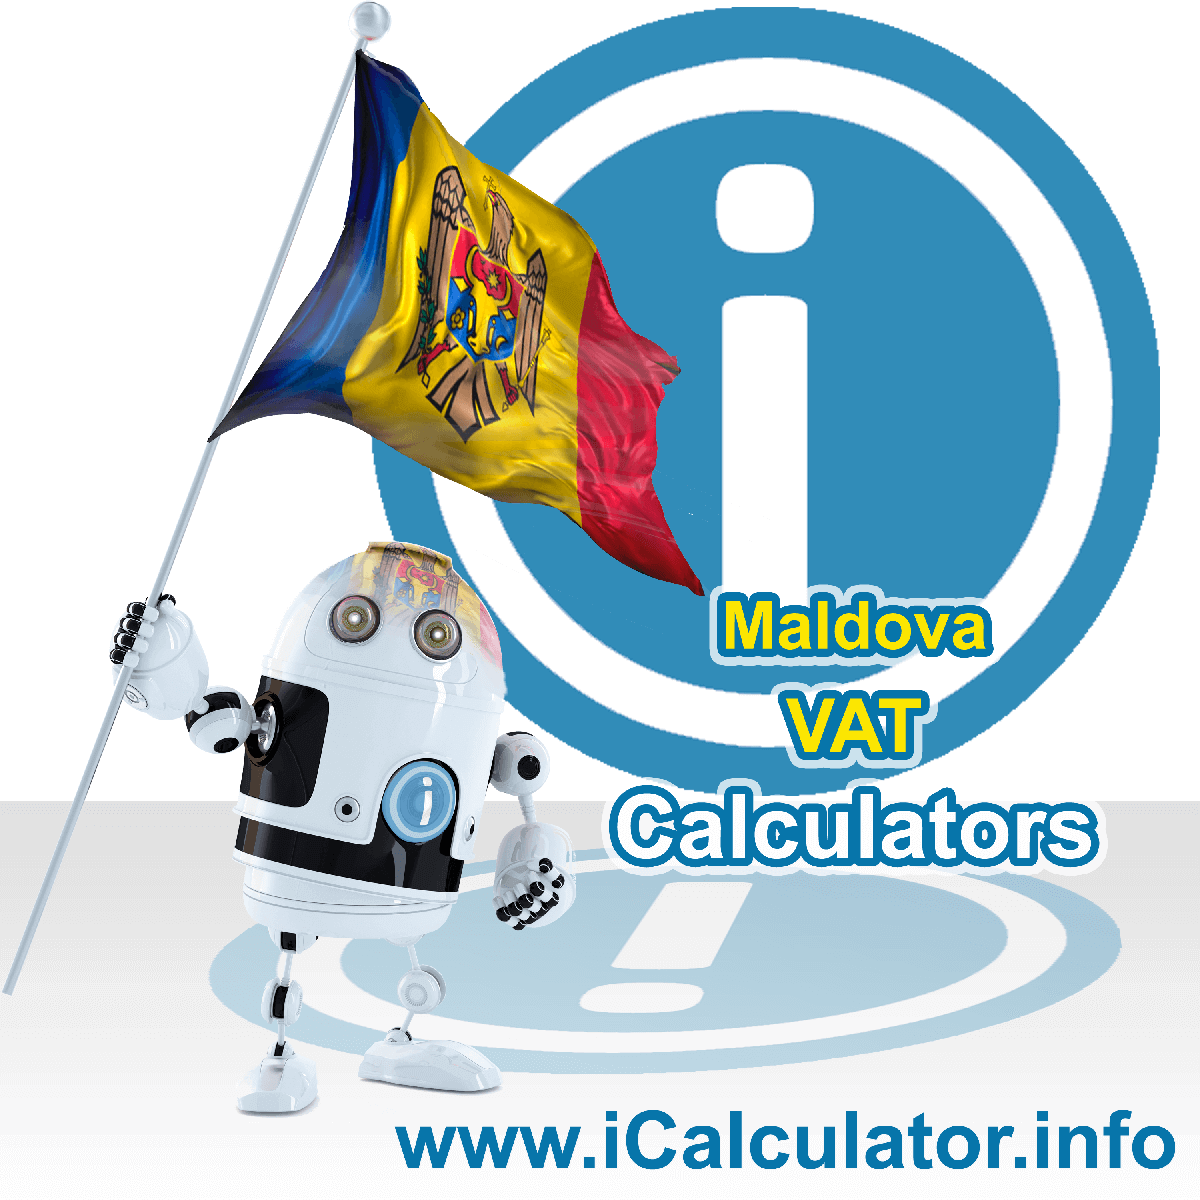 Moldova VAT Calculator. This image shows the Moldova flag and information relating to the VAT formula used for calculating Value Added Tax in Moldova using the Moldova VAT Calculator in 2022